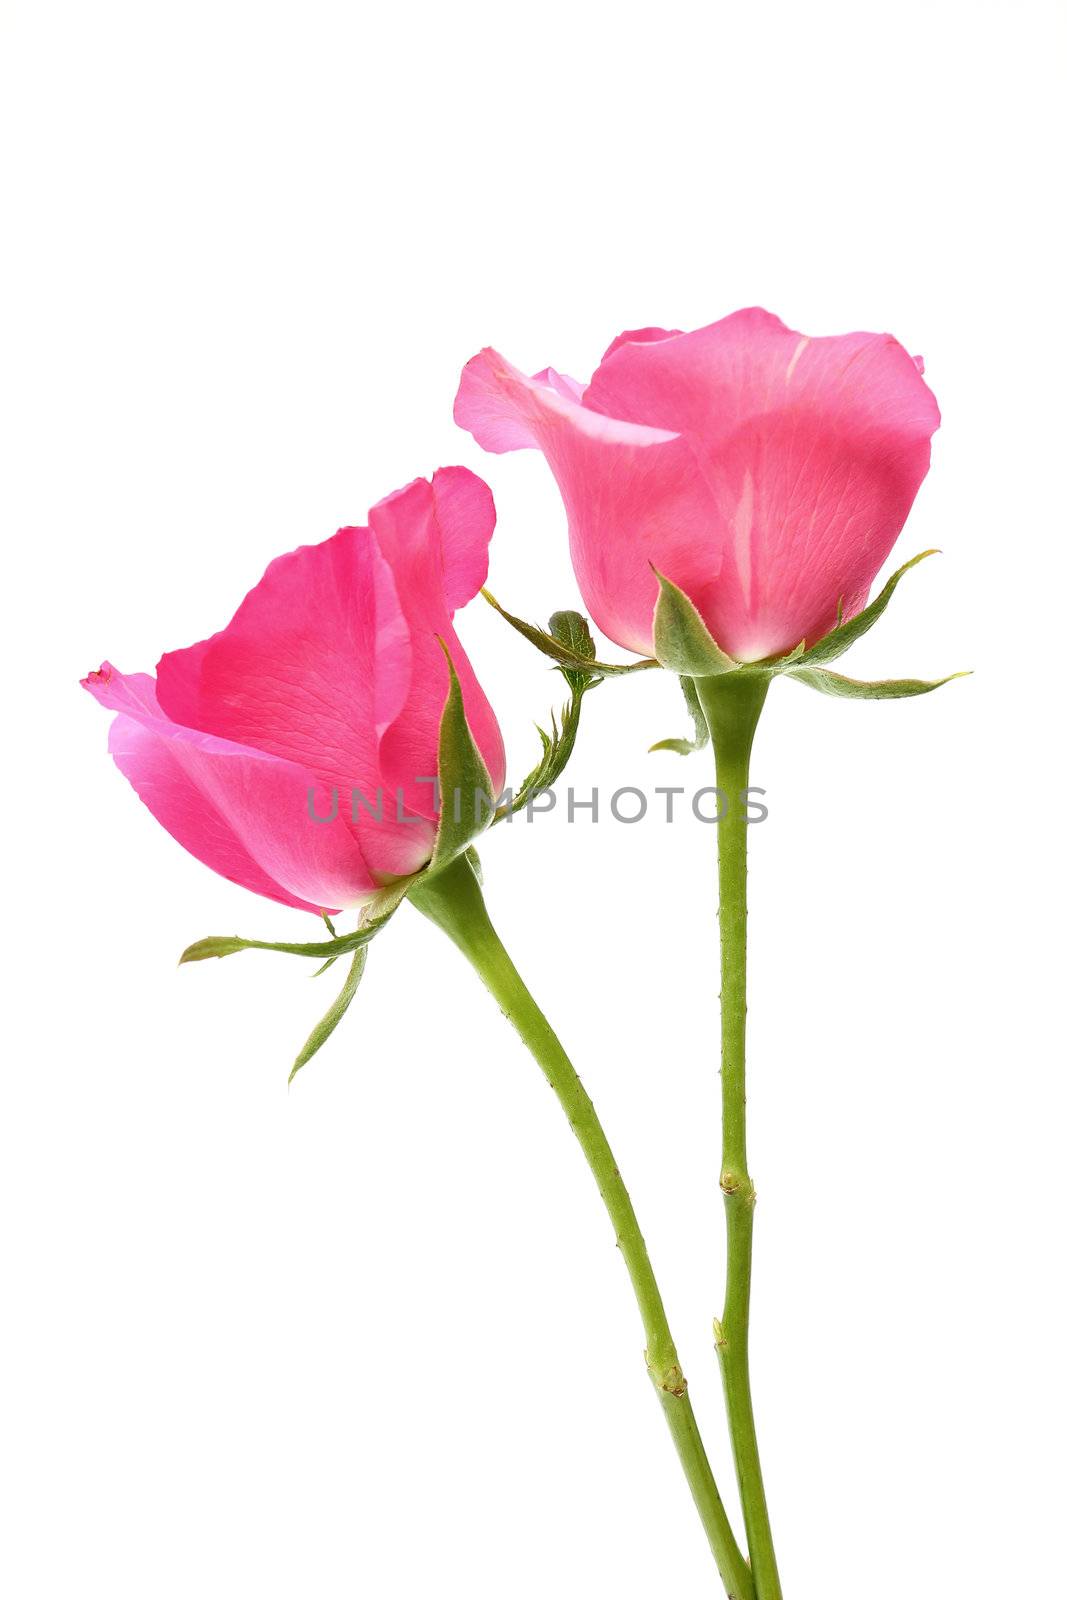 Two pink roses on white background by molly70photo